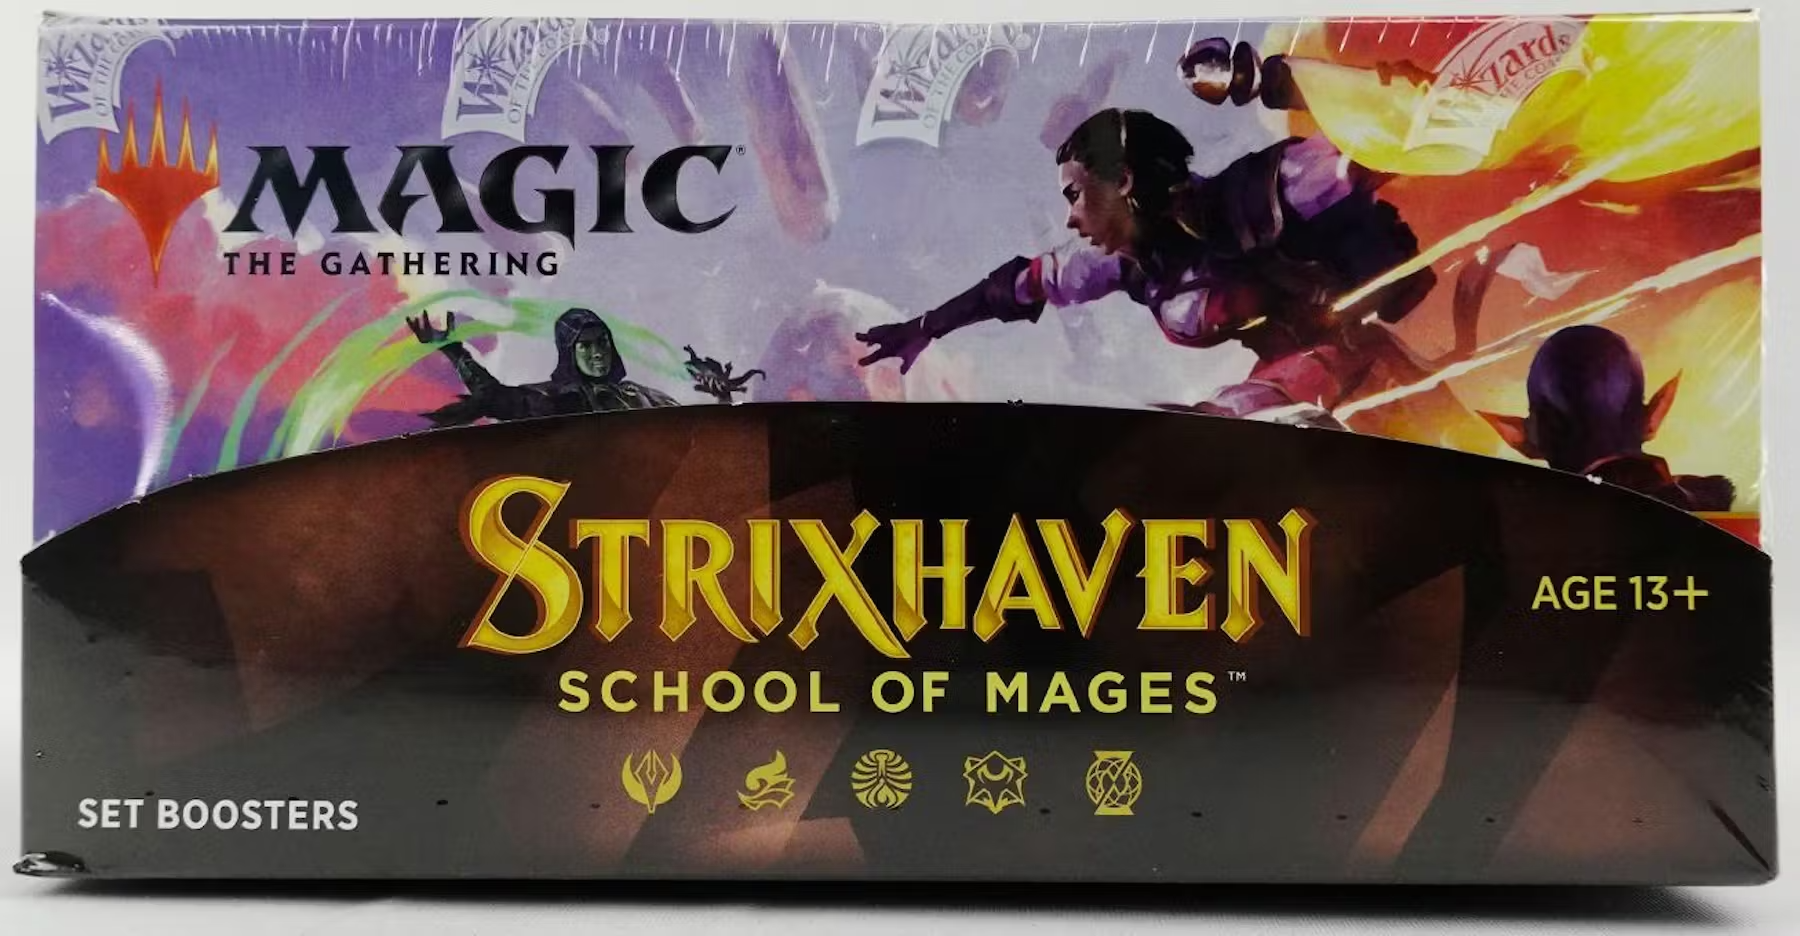 Magic the Gathering Strixhaven School of Mages Set Booster Box